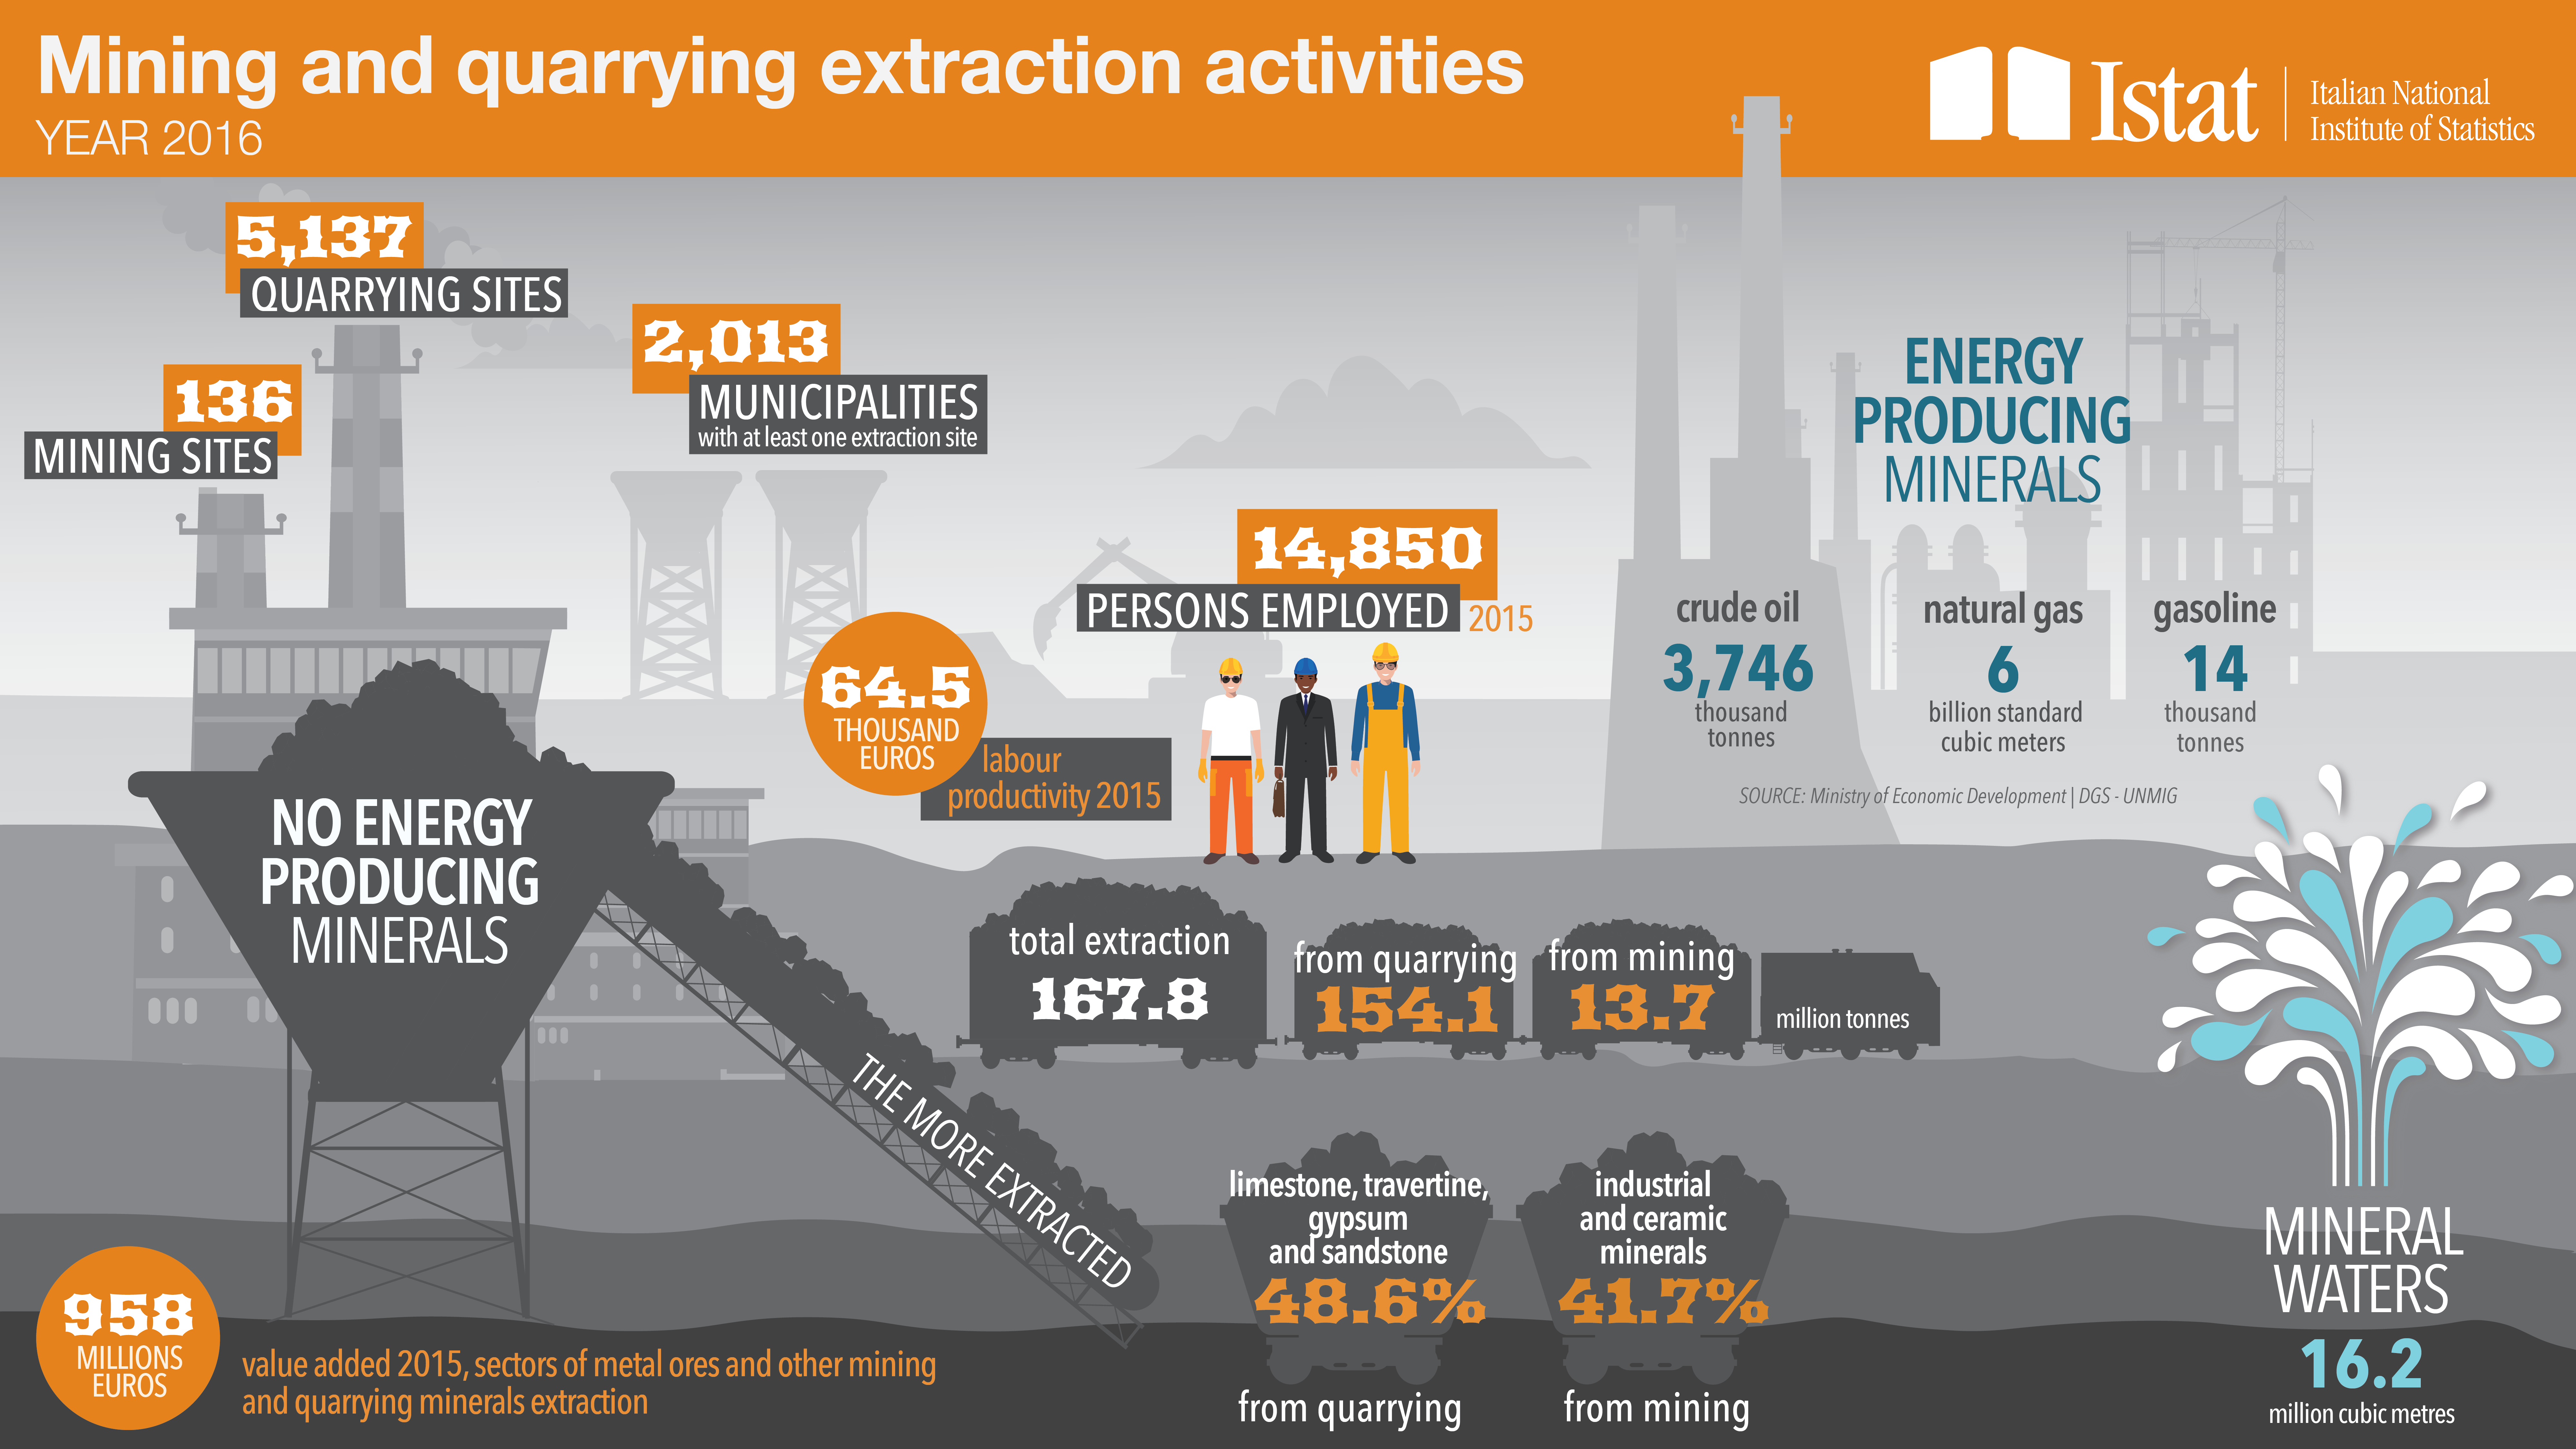 Infographic on Mining and quarrying extraction activities. Year 2016